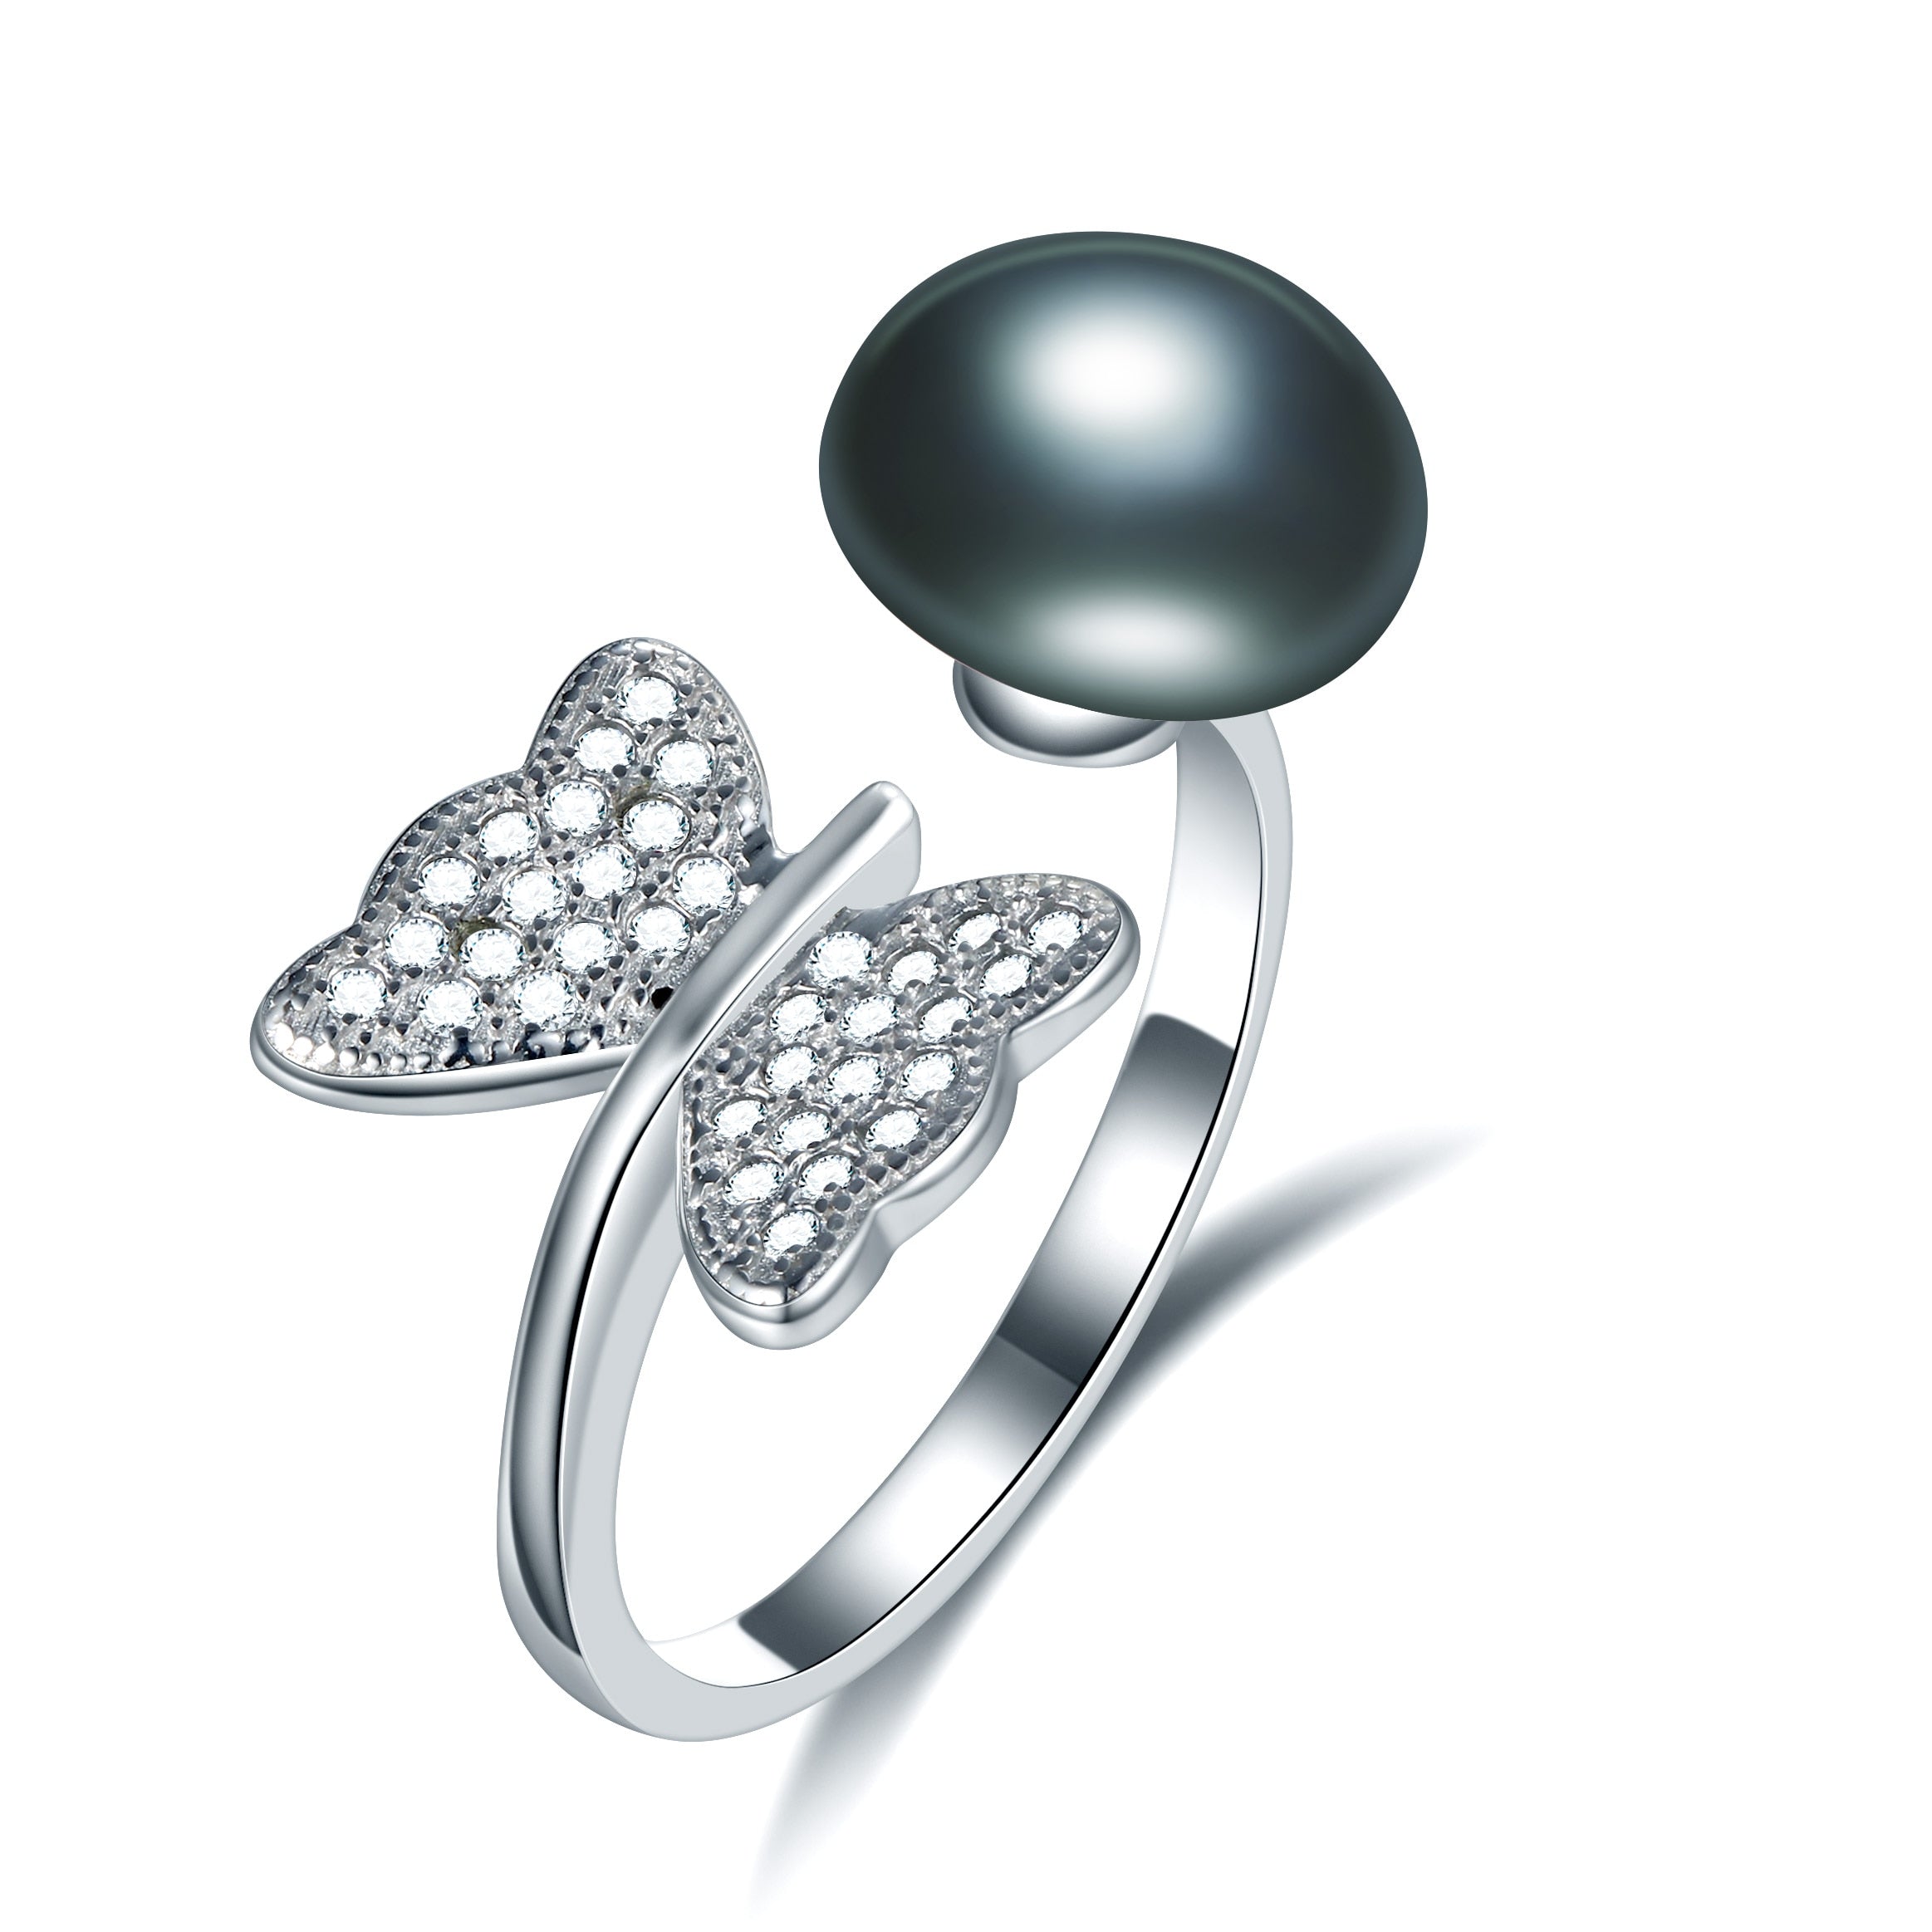 Real Natural Black Pearl Ring For Women